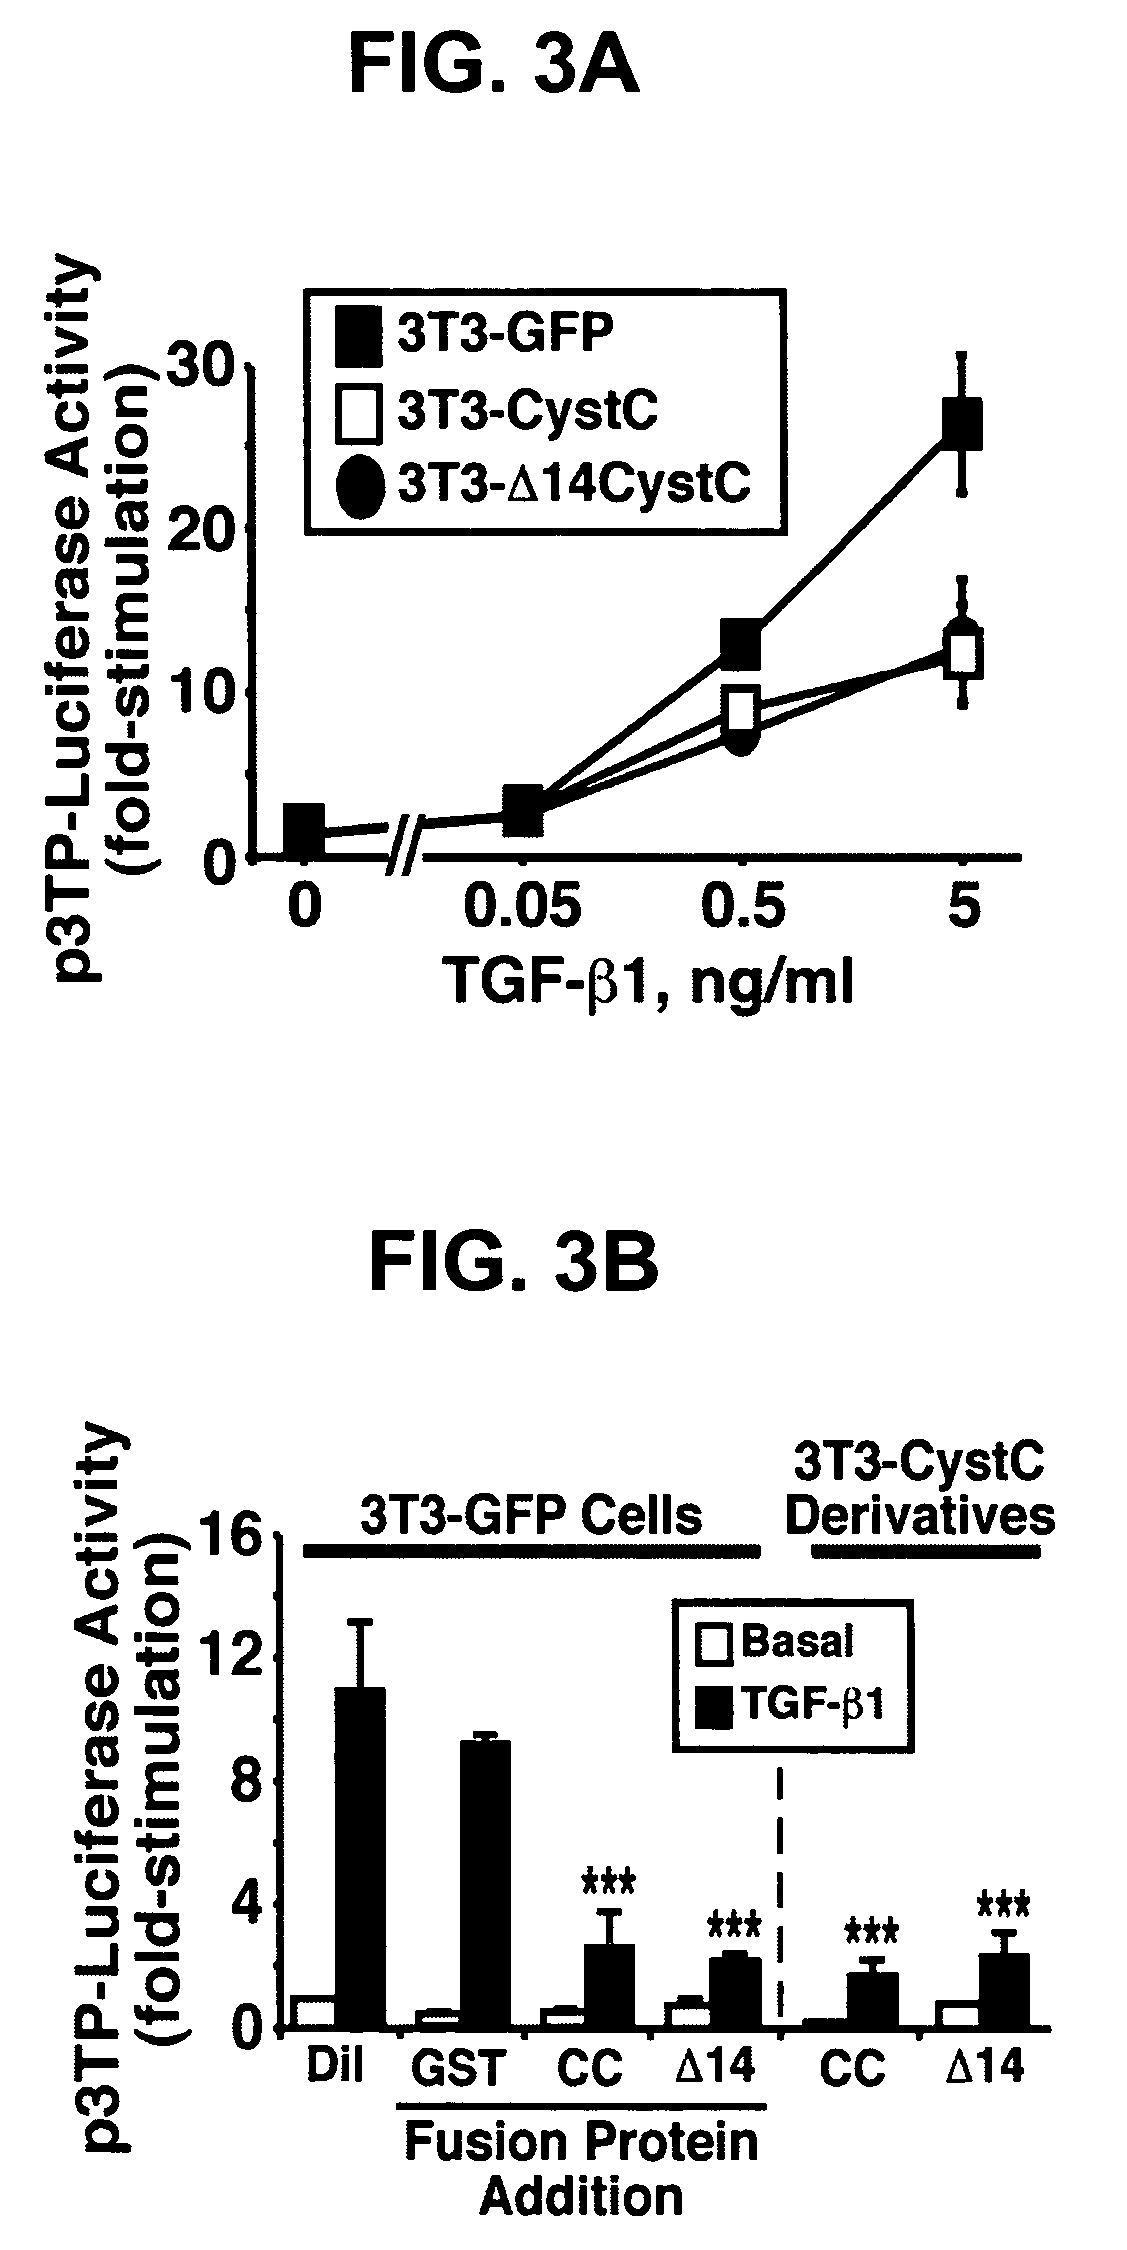 Cystatin C as an antagonist of TGF-beta and methods related thereto